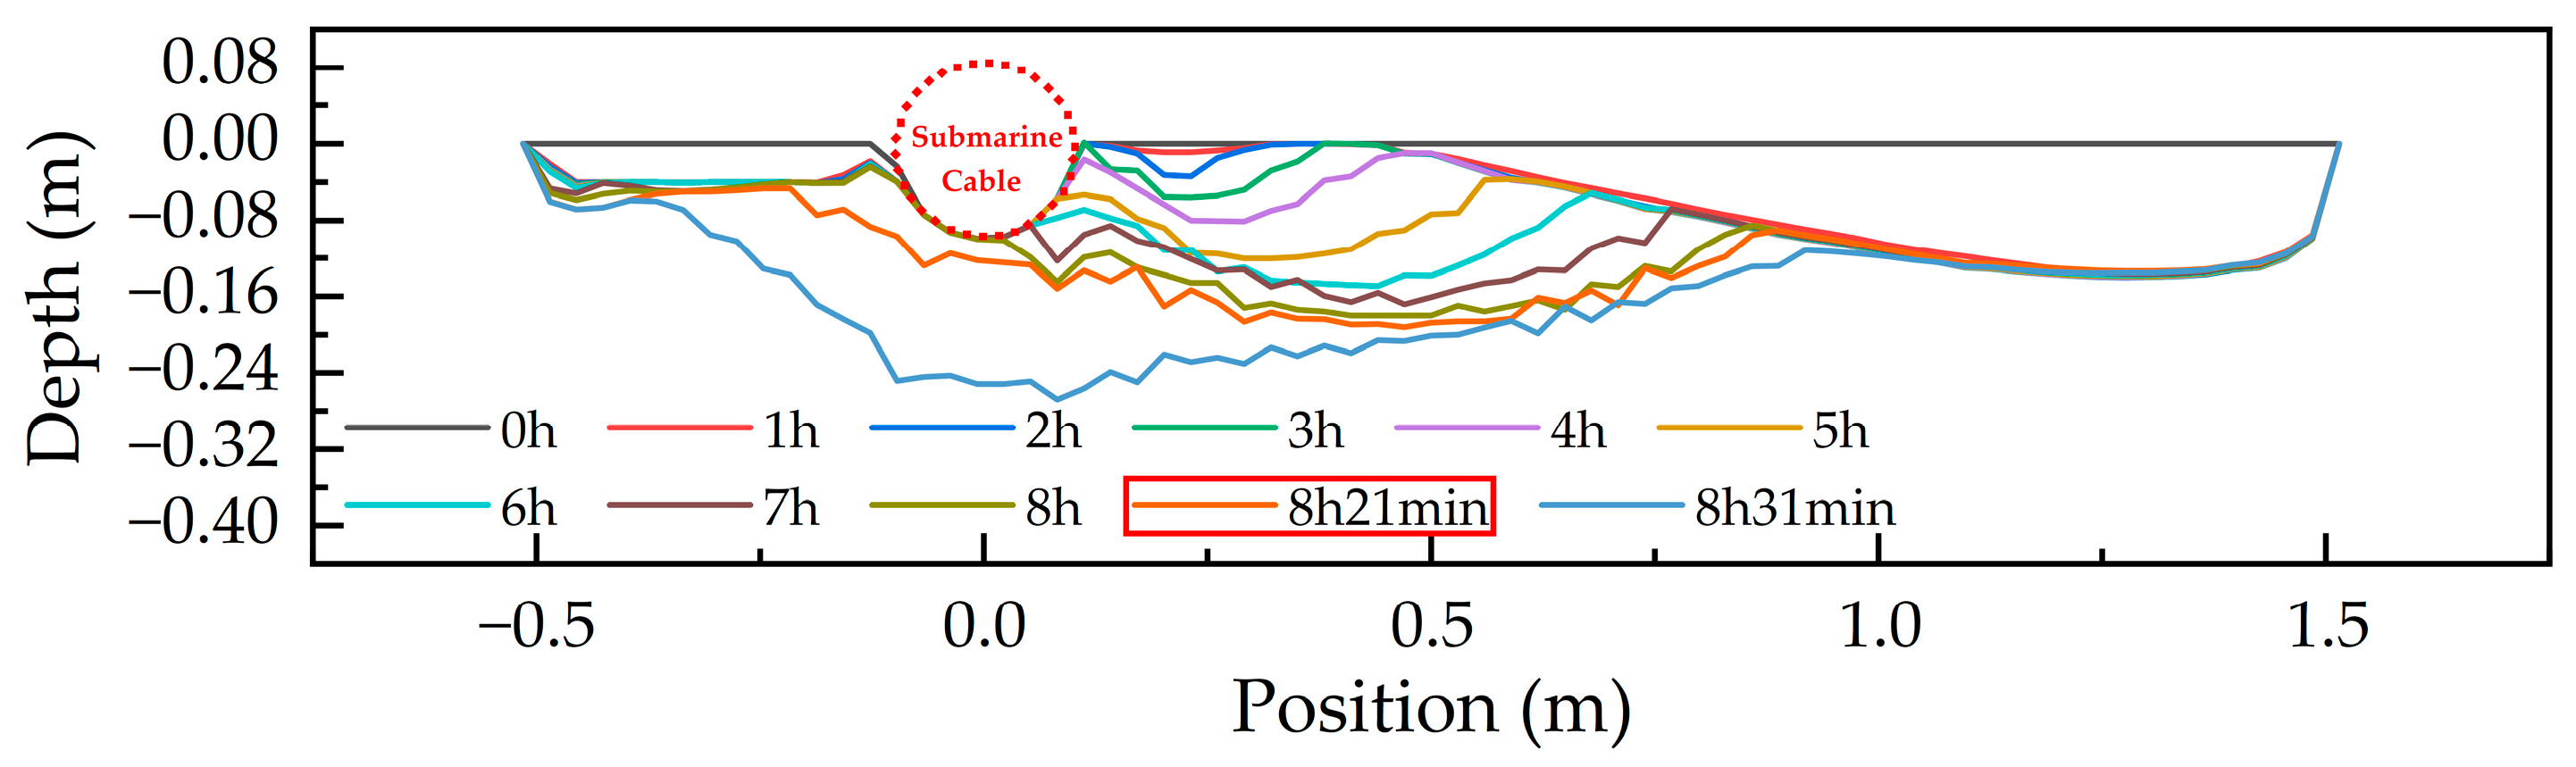 JMSE | Free Full-Text | Numerical Study of the Local Scouring Process ...